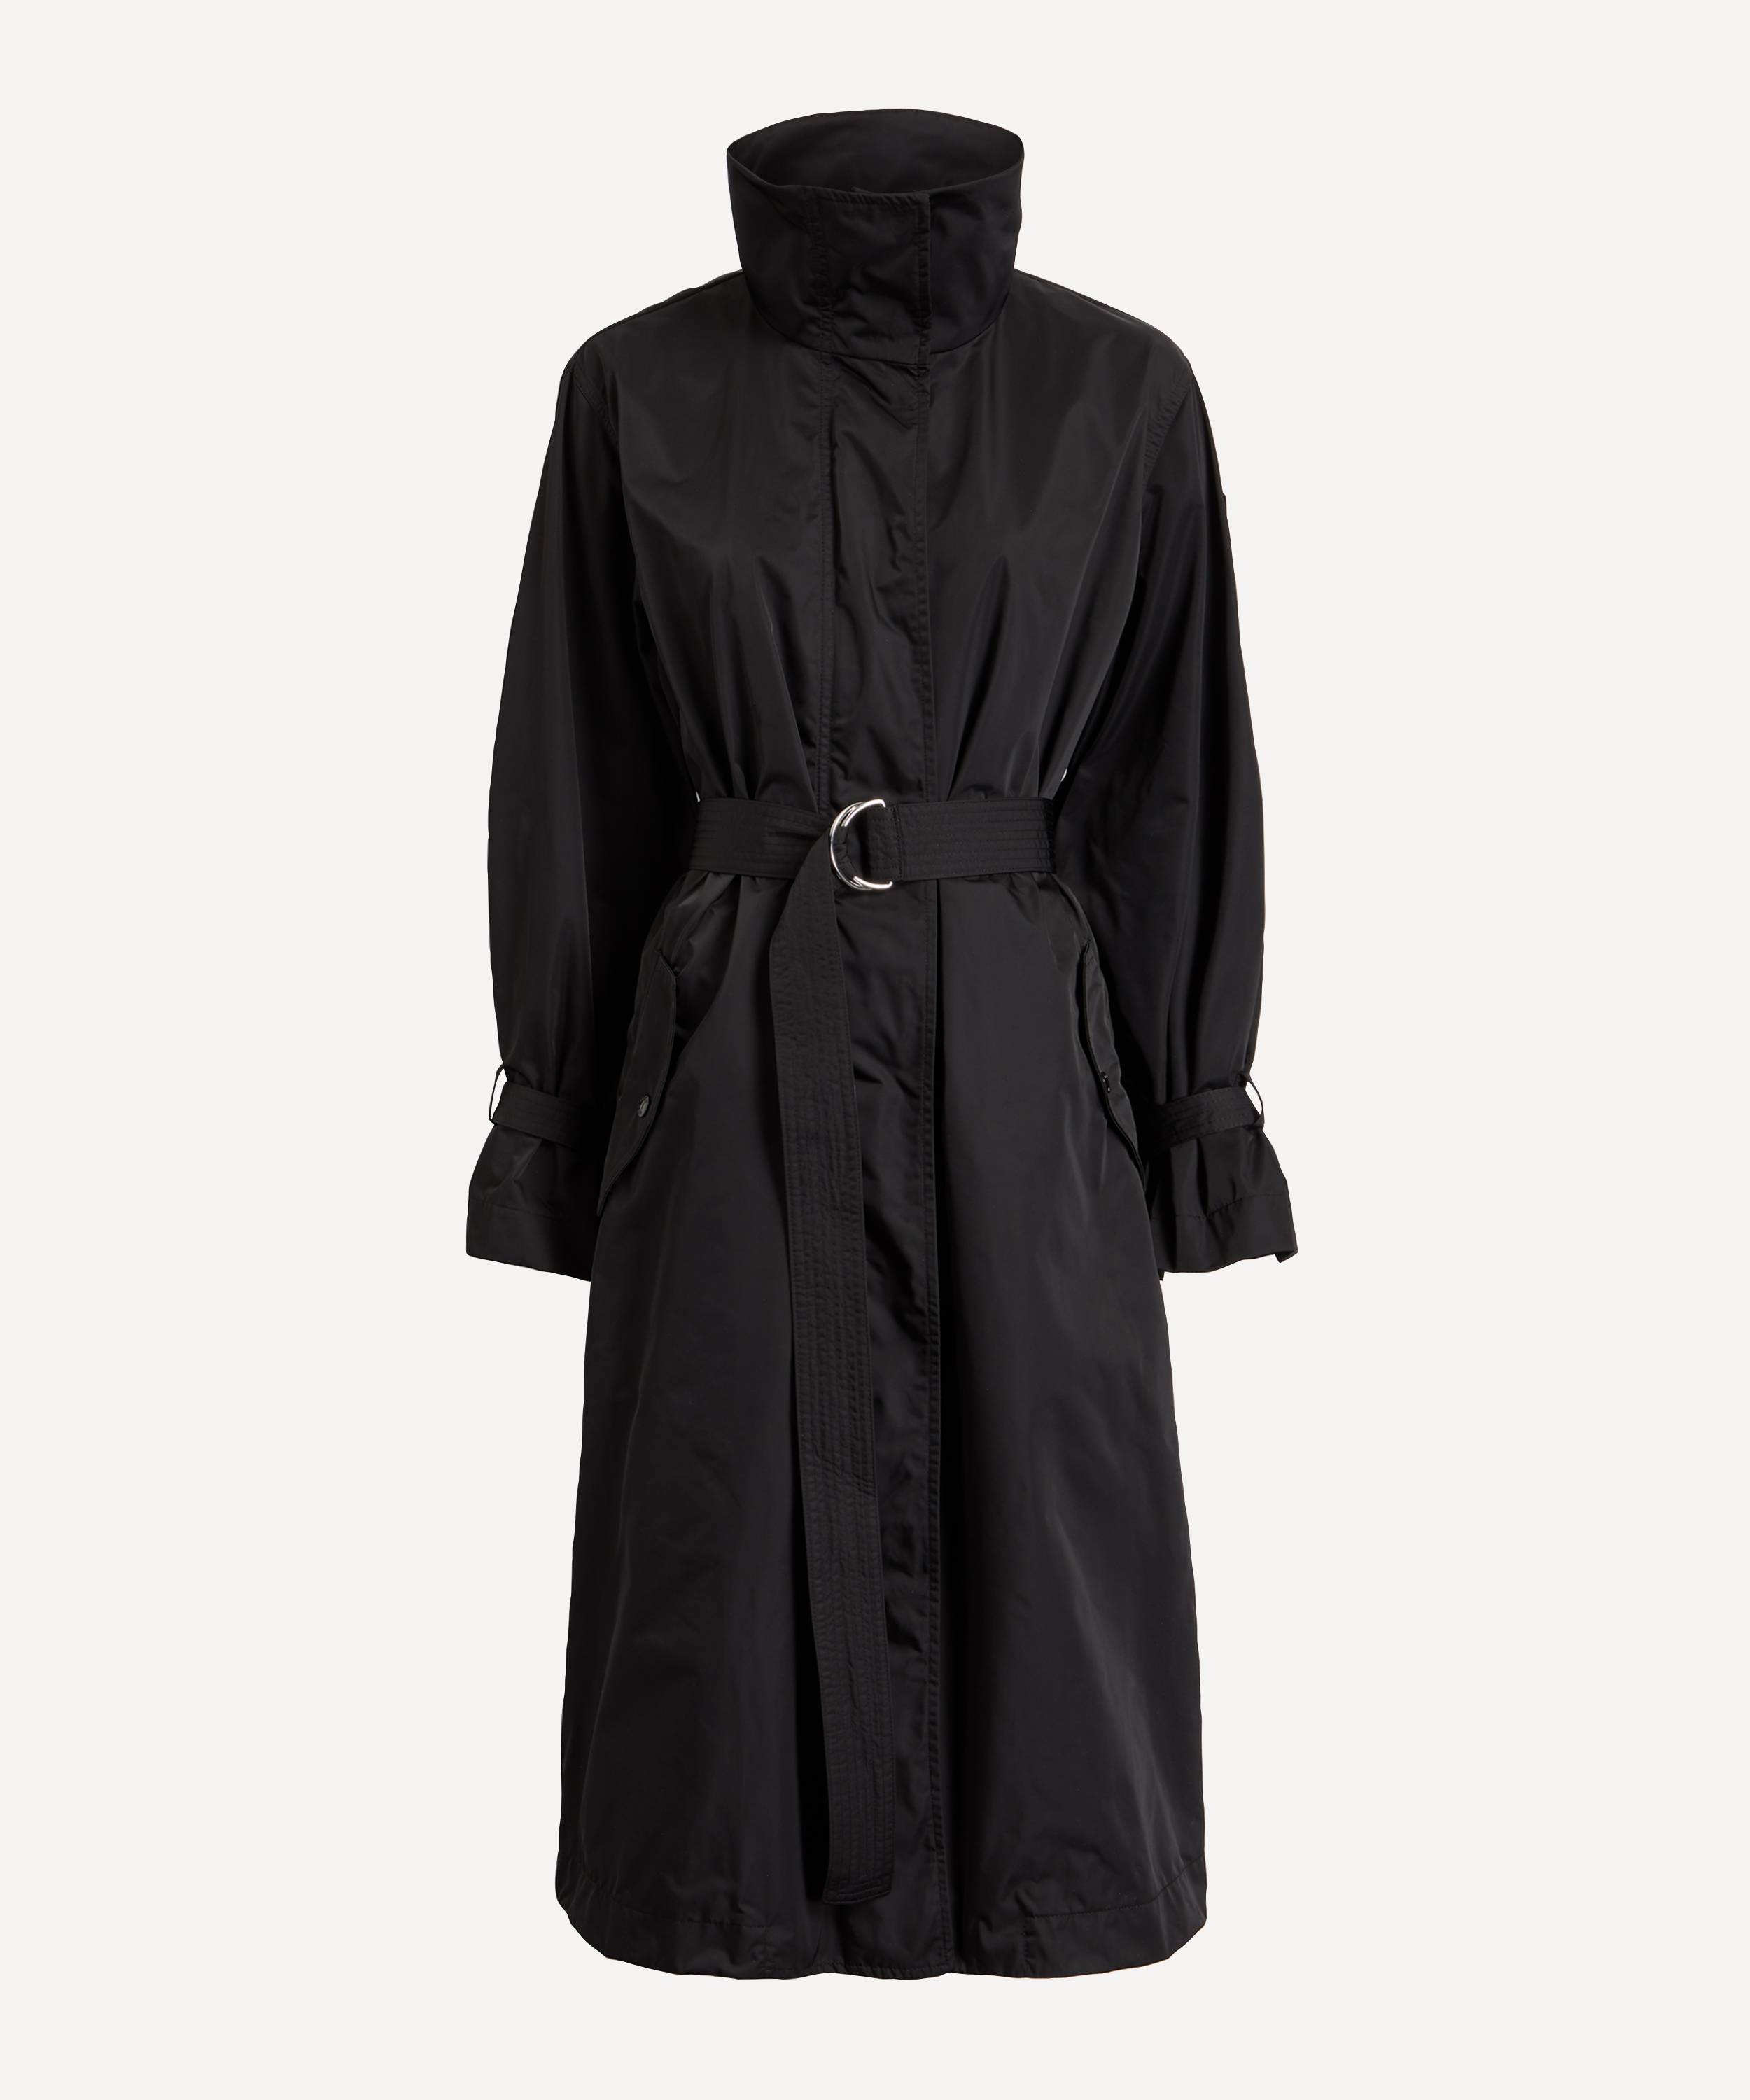 Moncler Tourgeville Trench Coat | Liberty